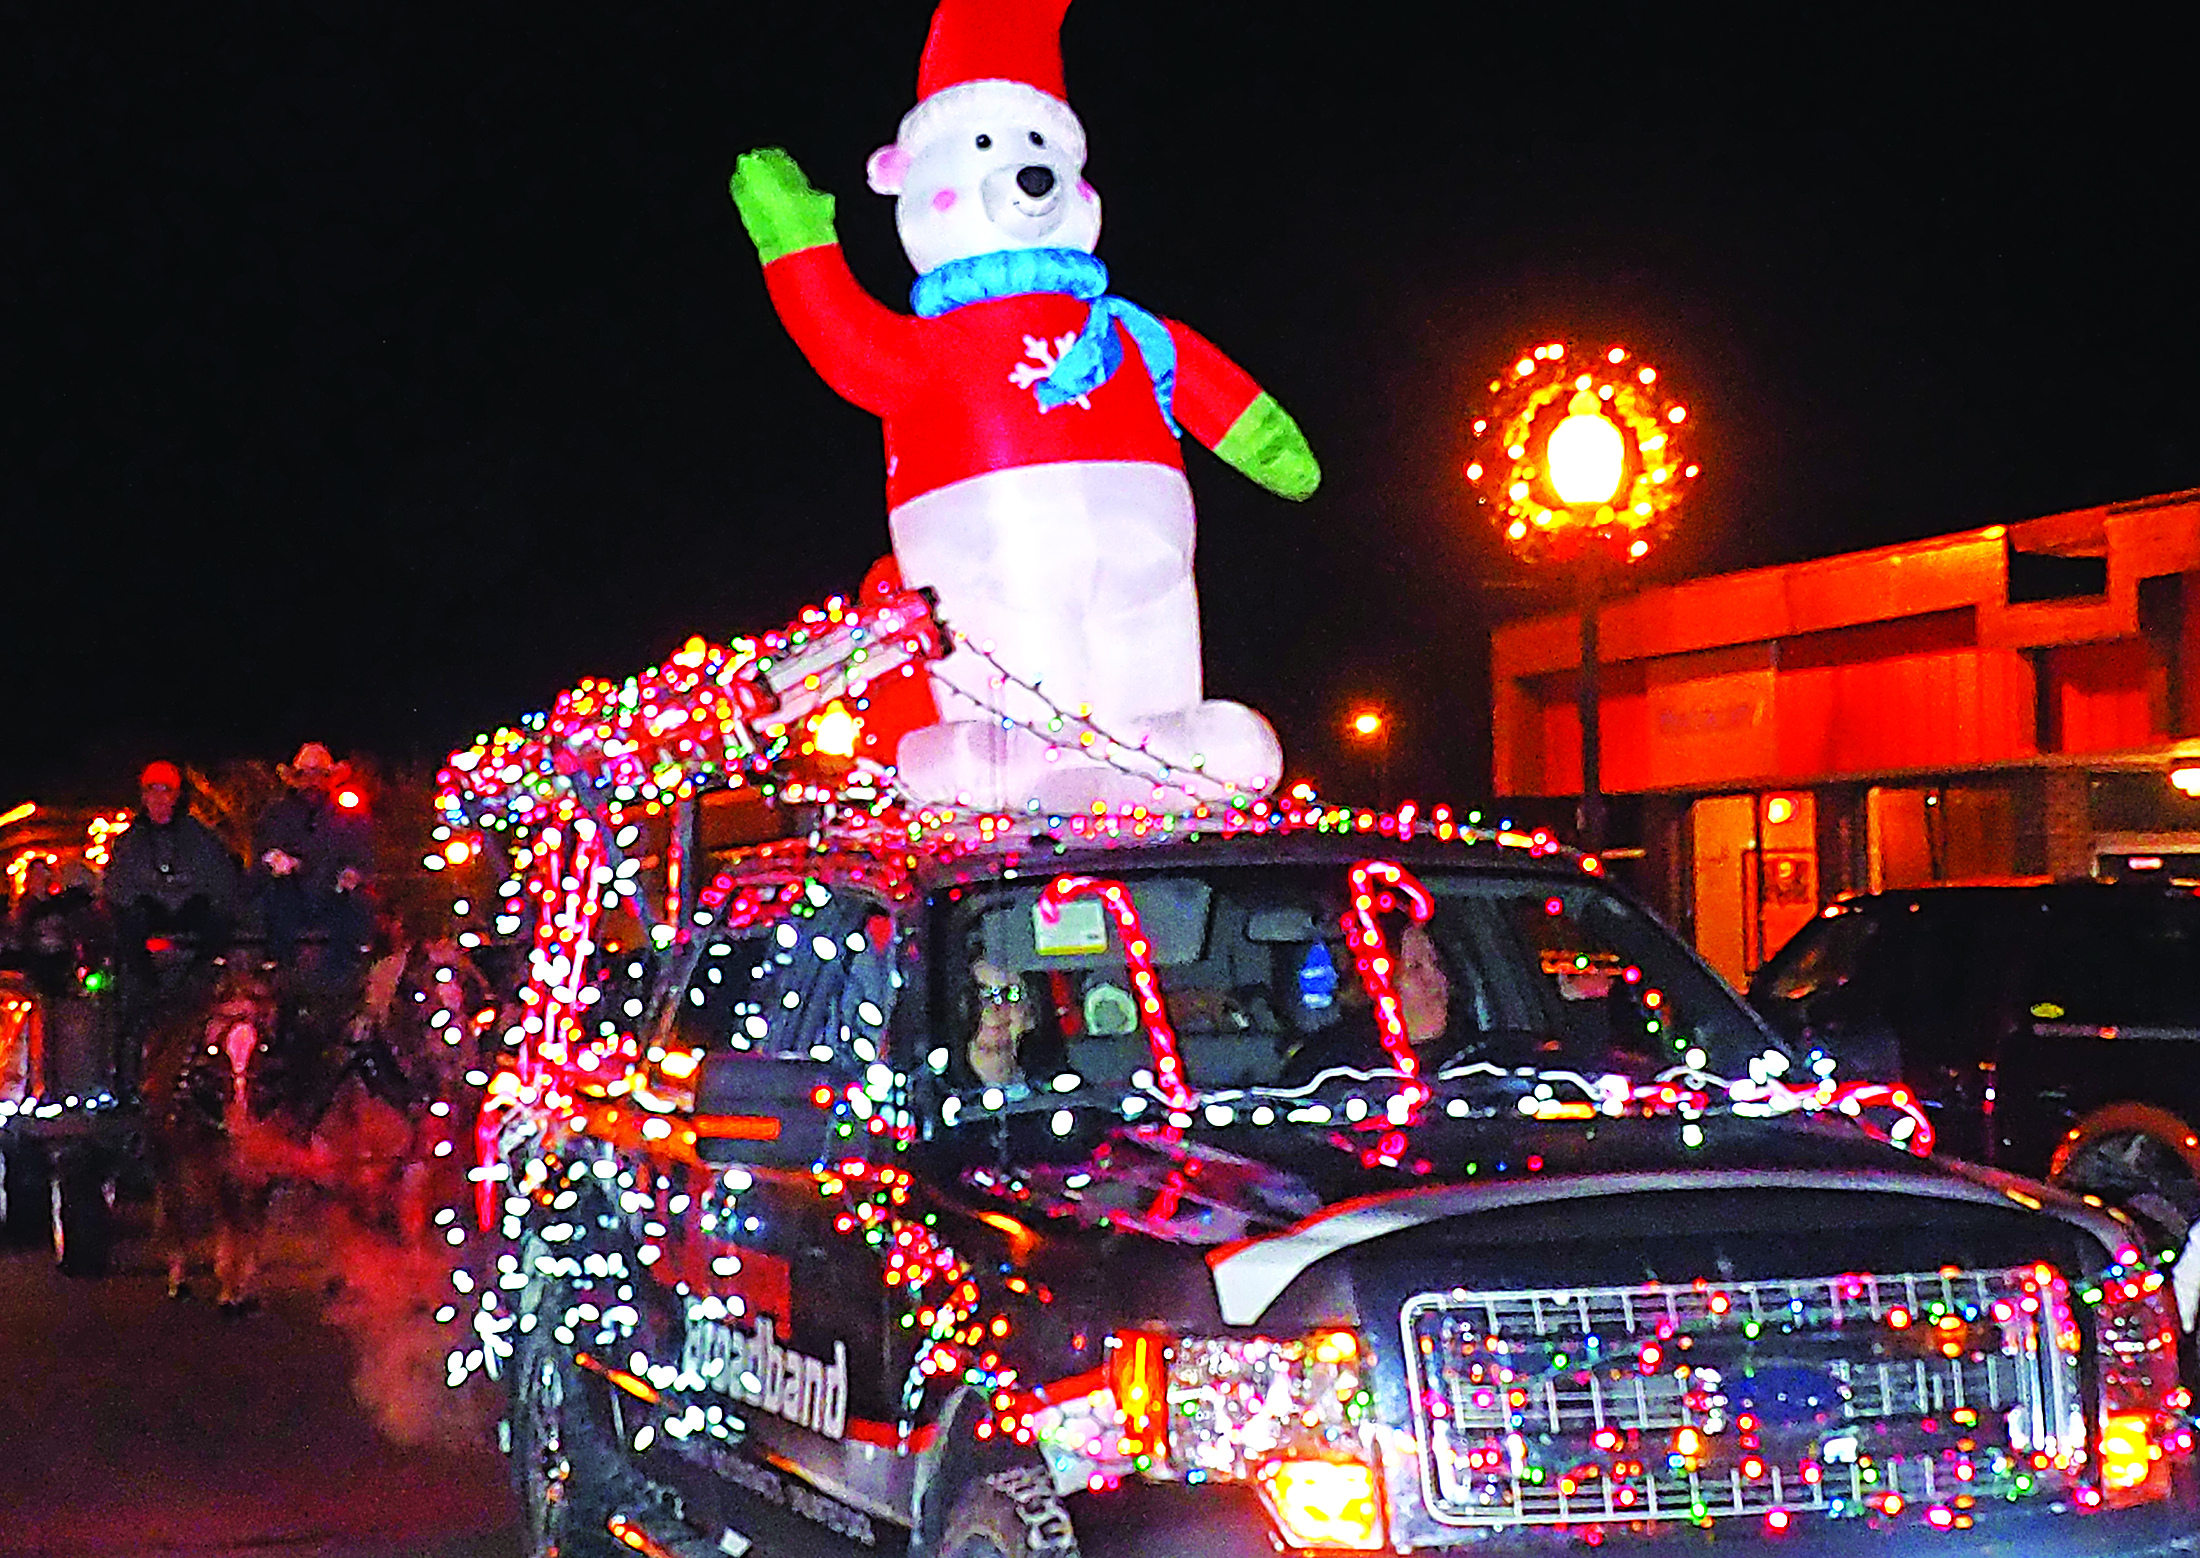 Charles City Lighted Parade, Arts Center Holiday Party set for Dec. 1